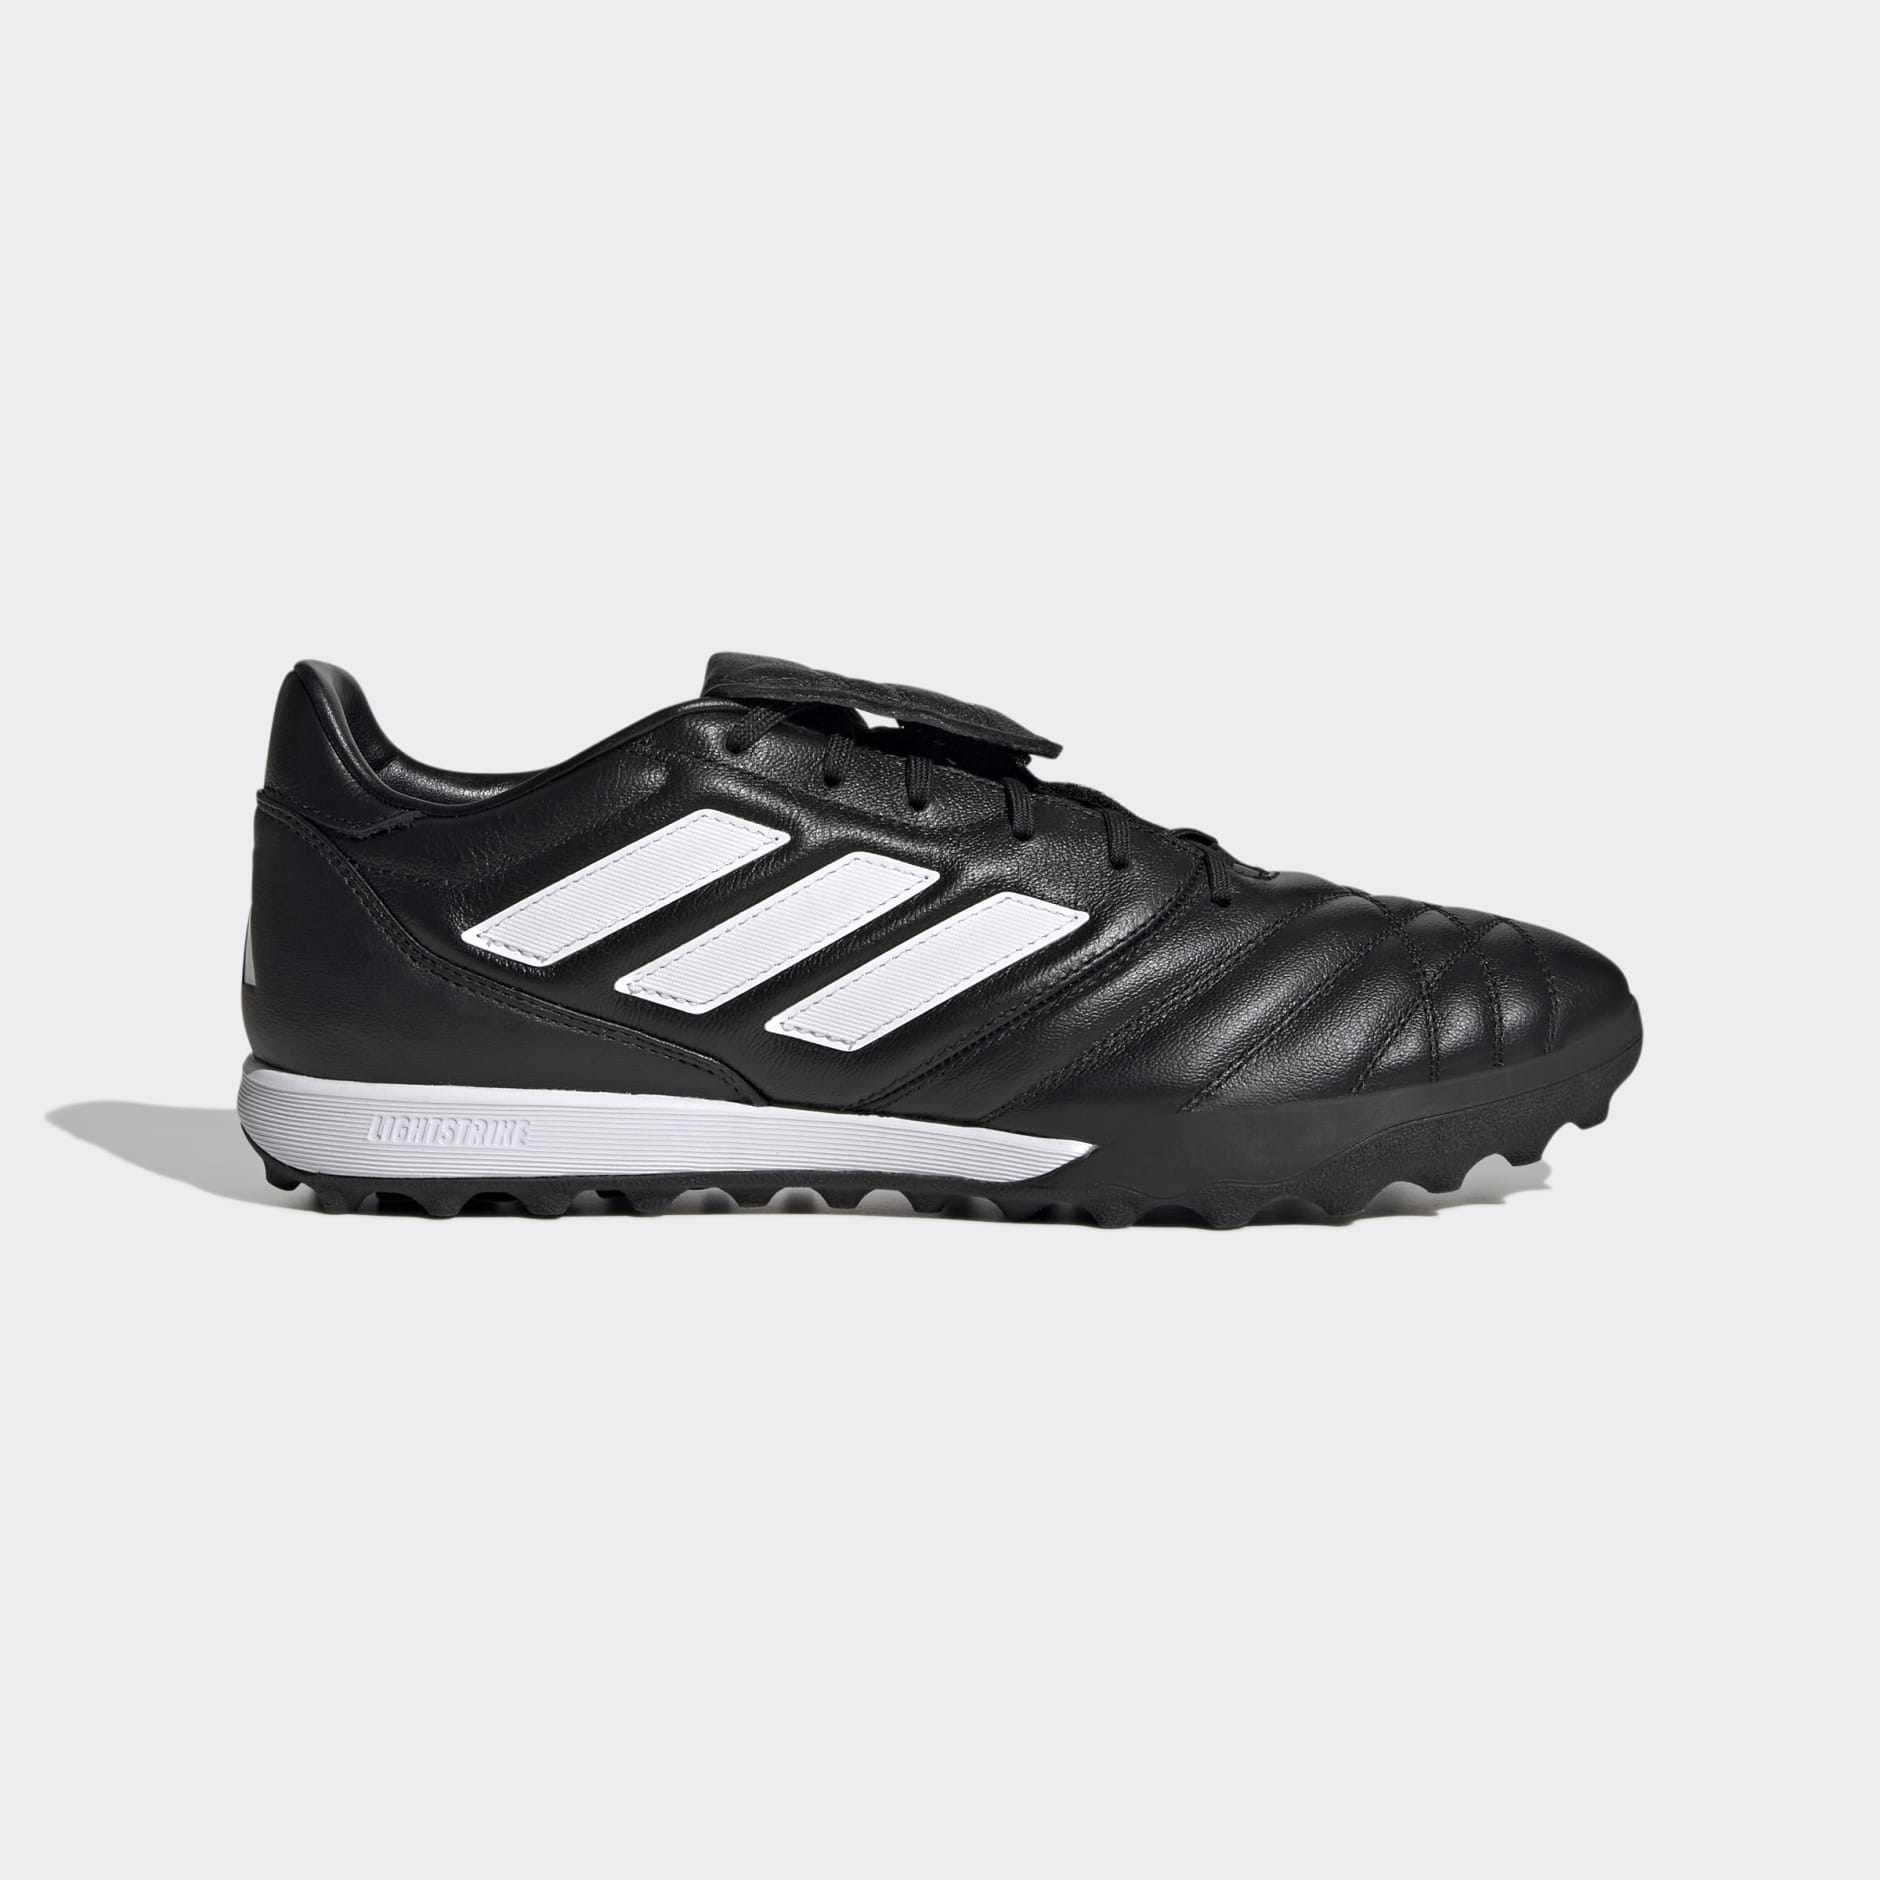 All products - Copa Gloro Turf Boots - Black | adidas South Africa